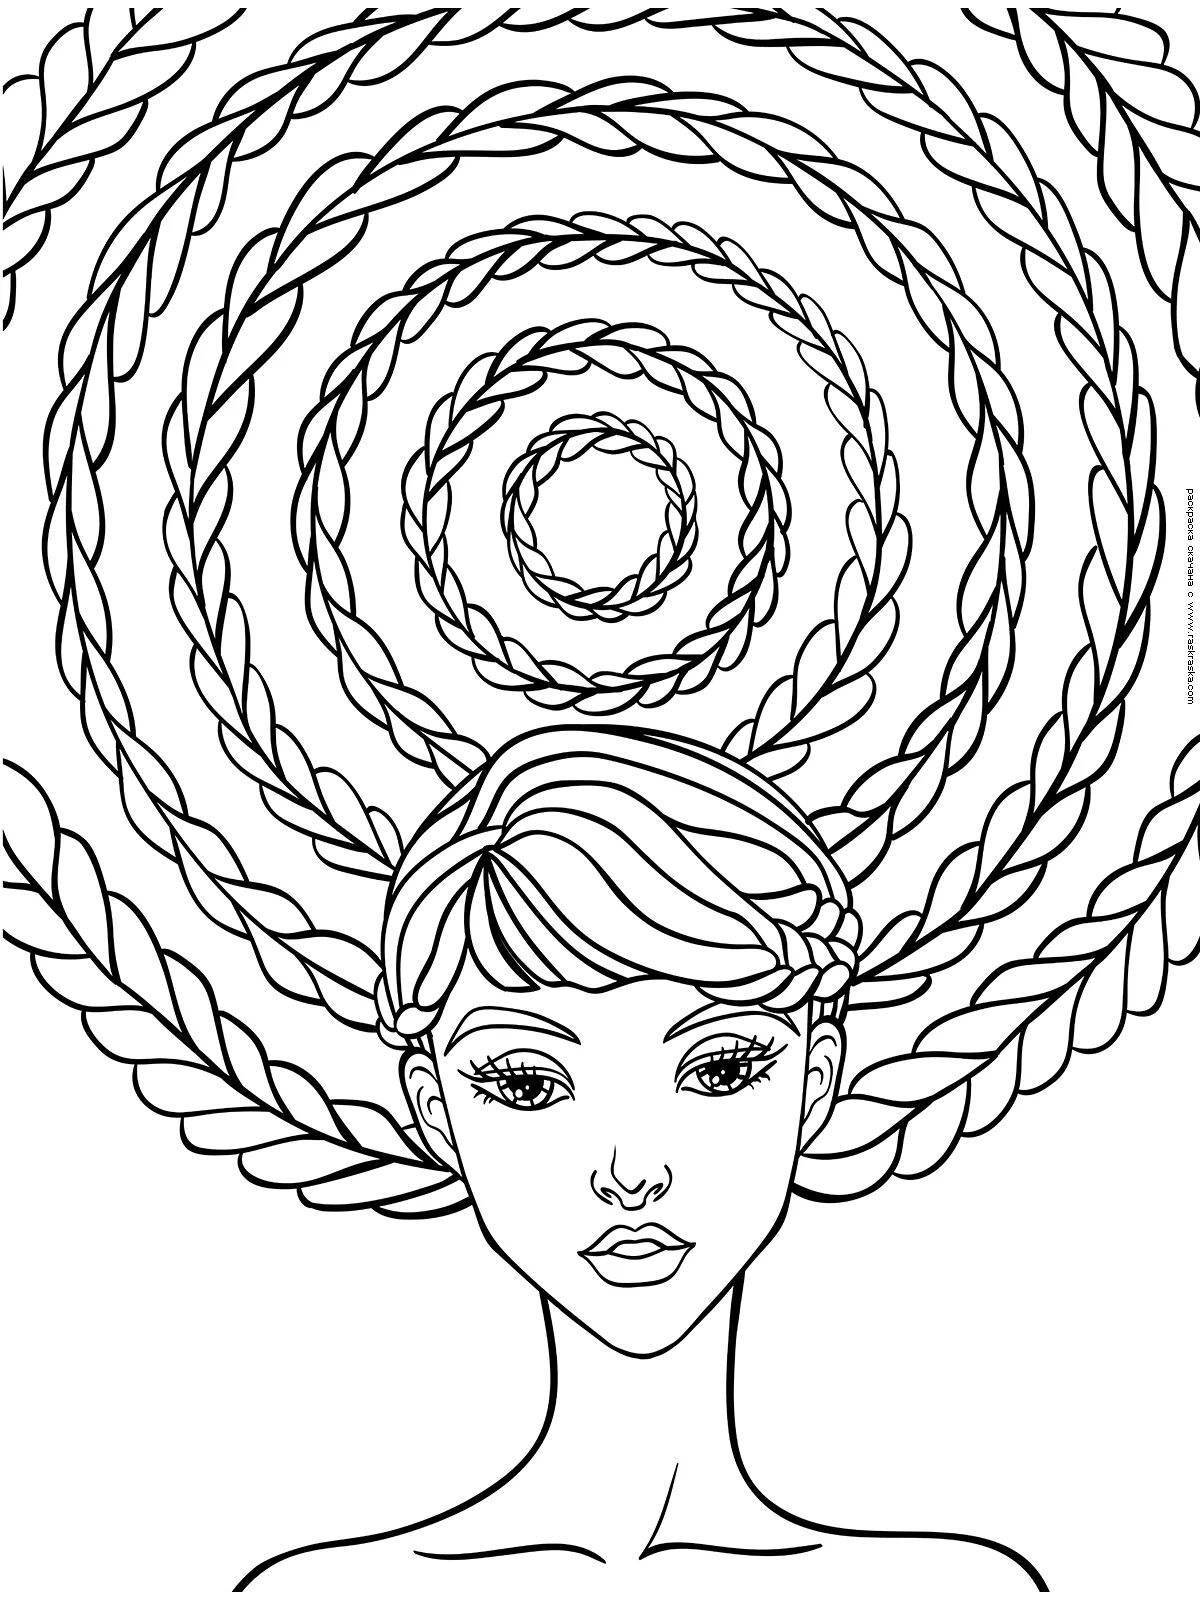 Radiant girl hair coloring page